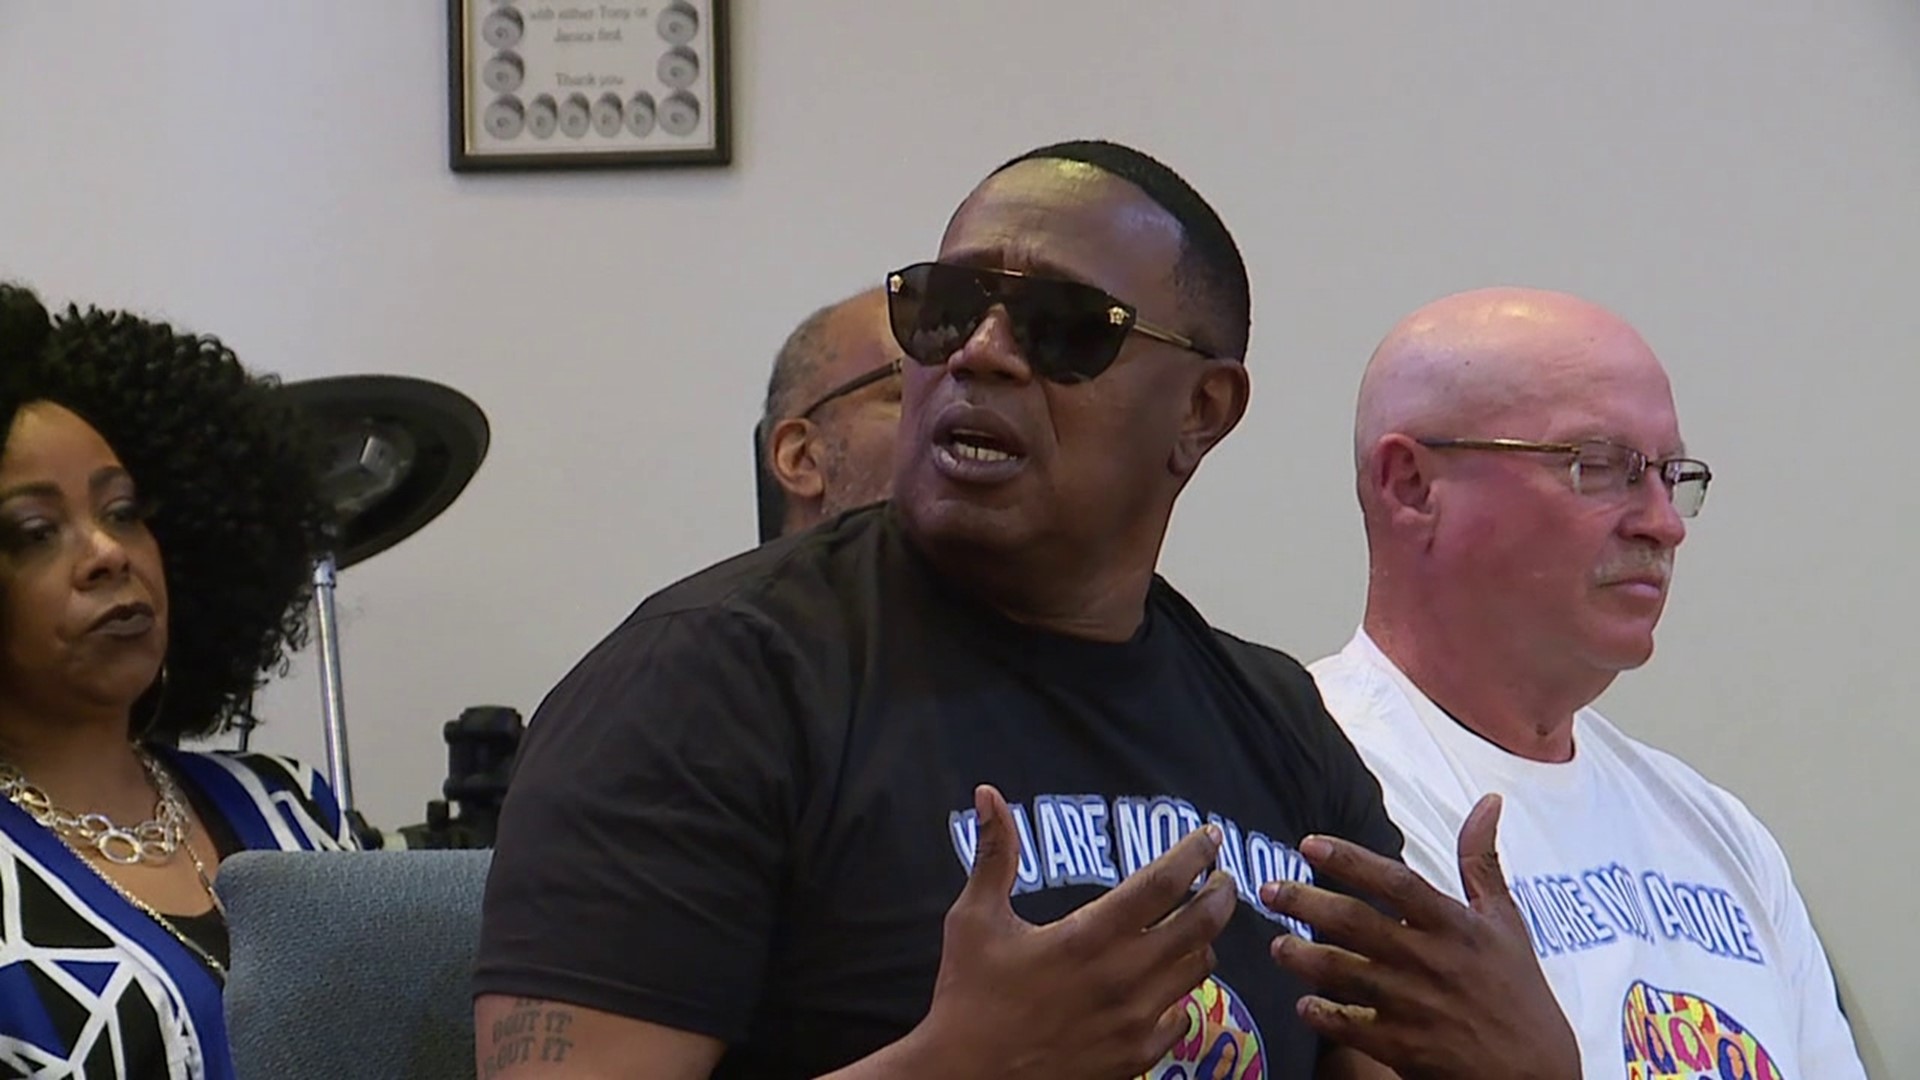 The retired popular hip-hop artist stopped in Williamsport Sunday to discuss drug prevention after losing his daughter to an overdose just a few weeks ago.